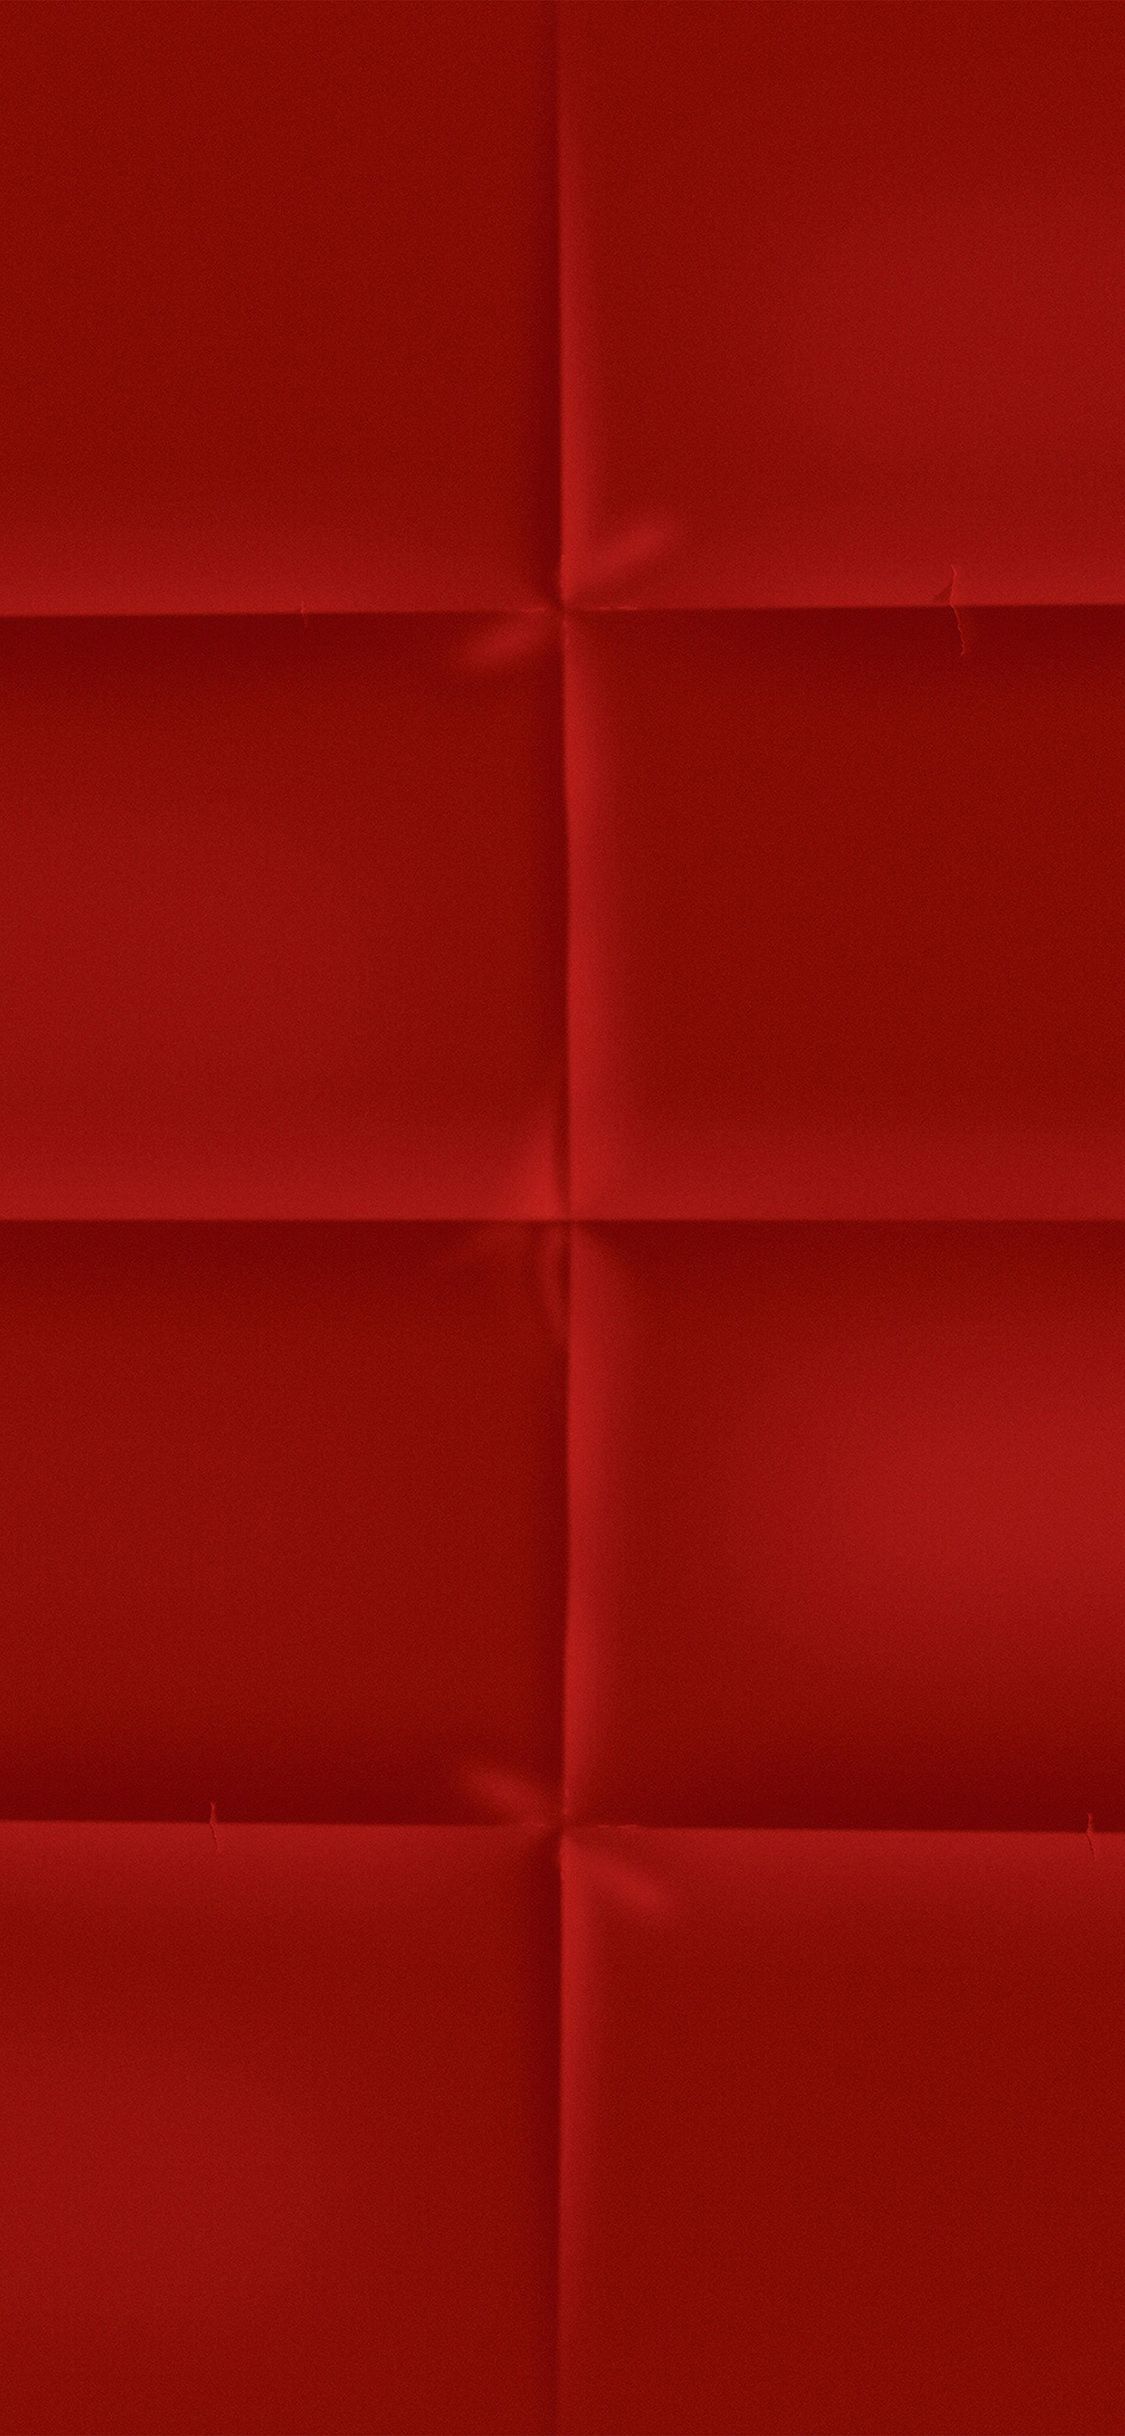 iPhone 8 wallpaper. red texture paper pattern